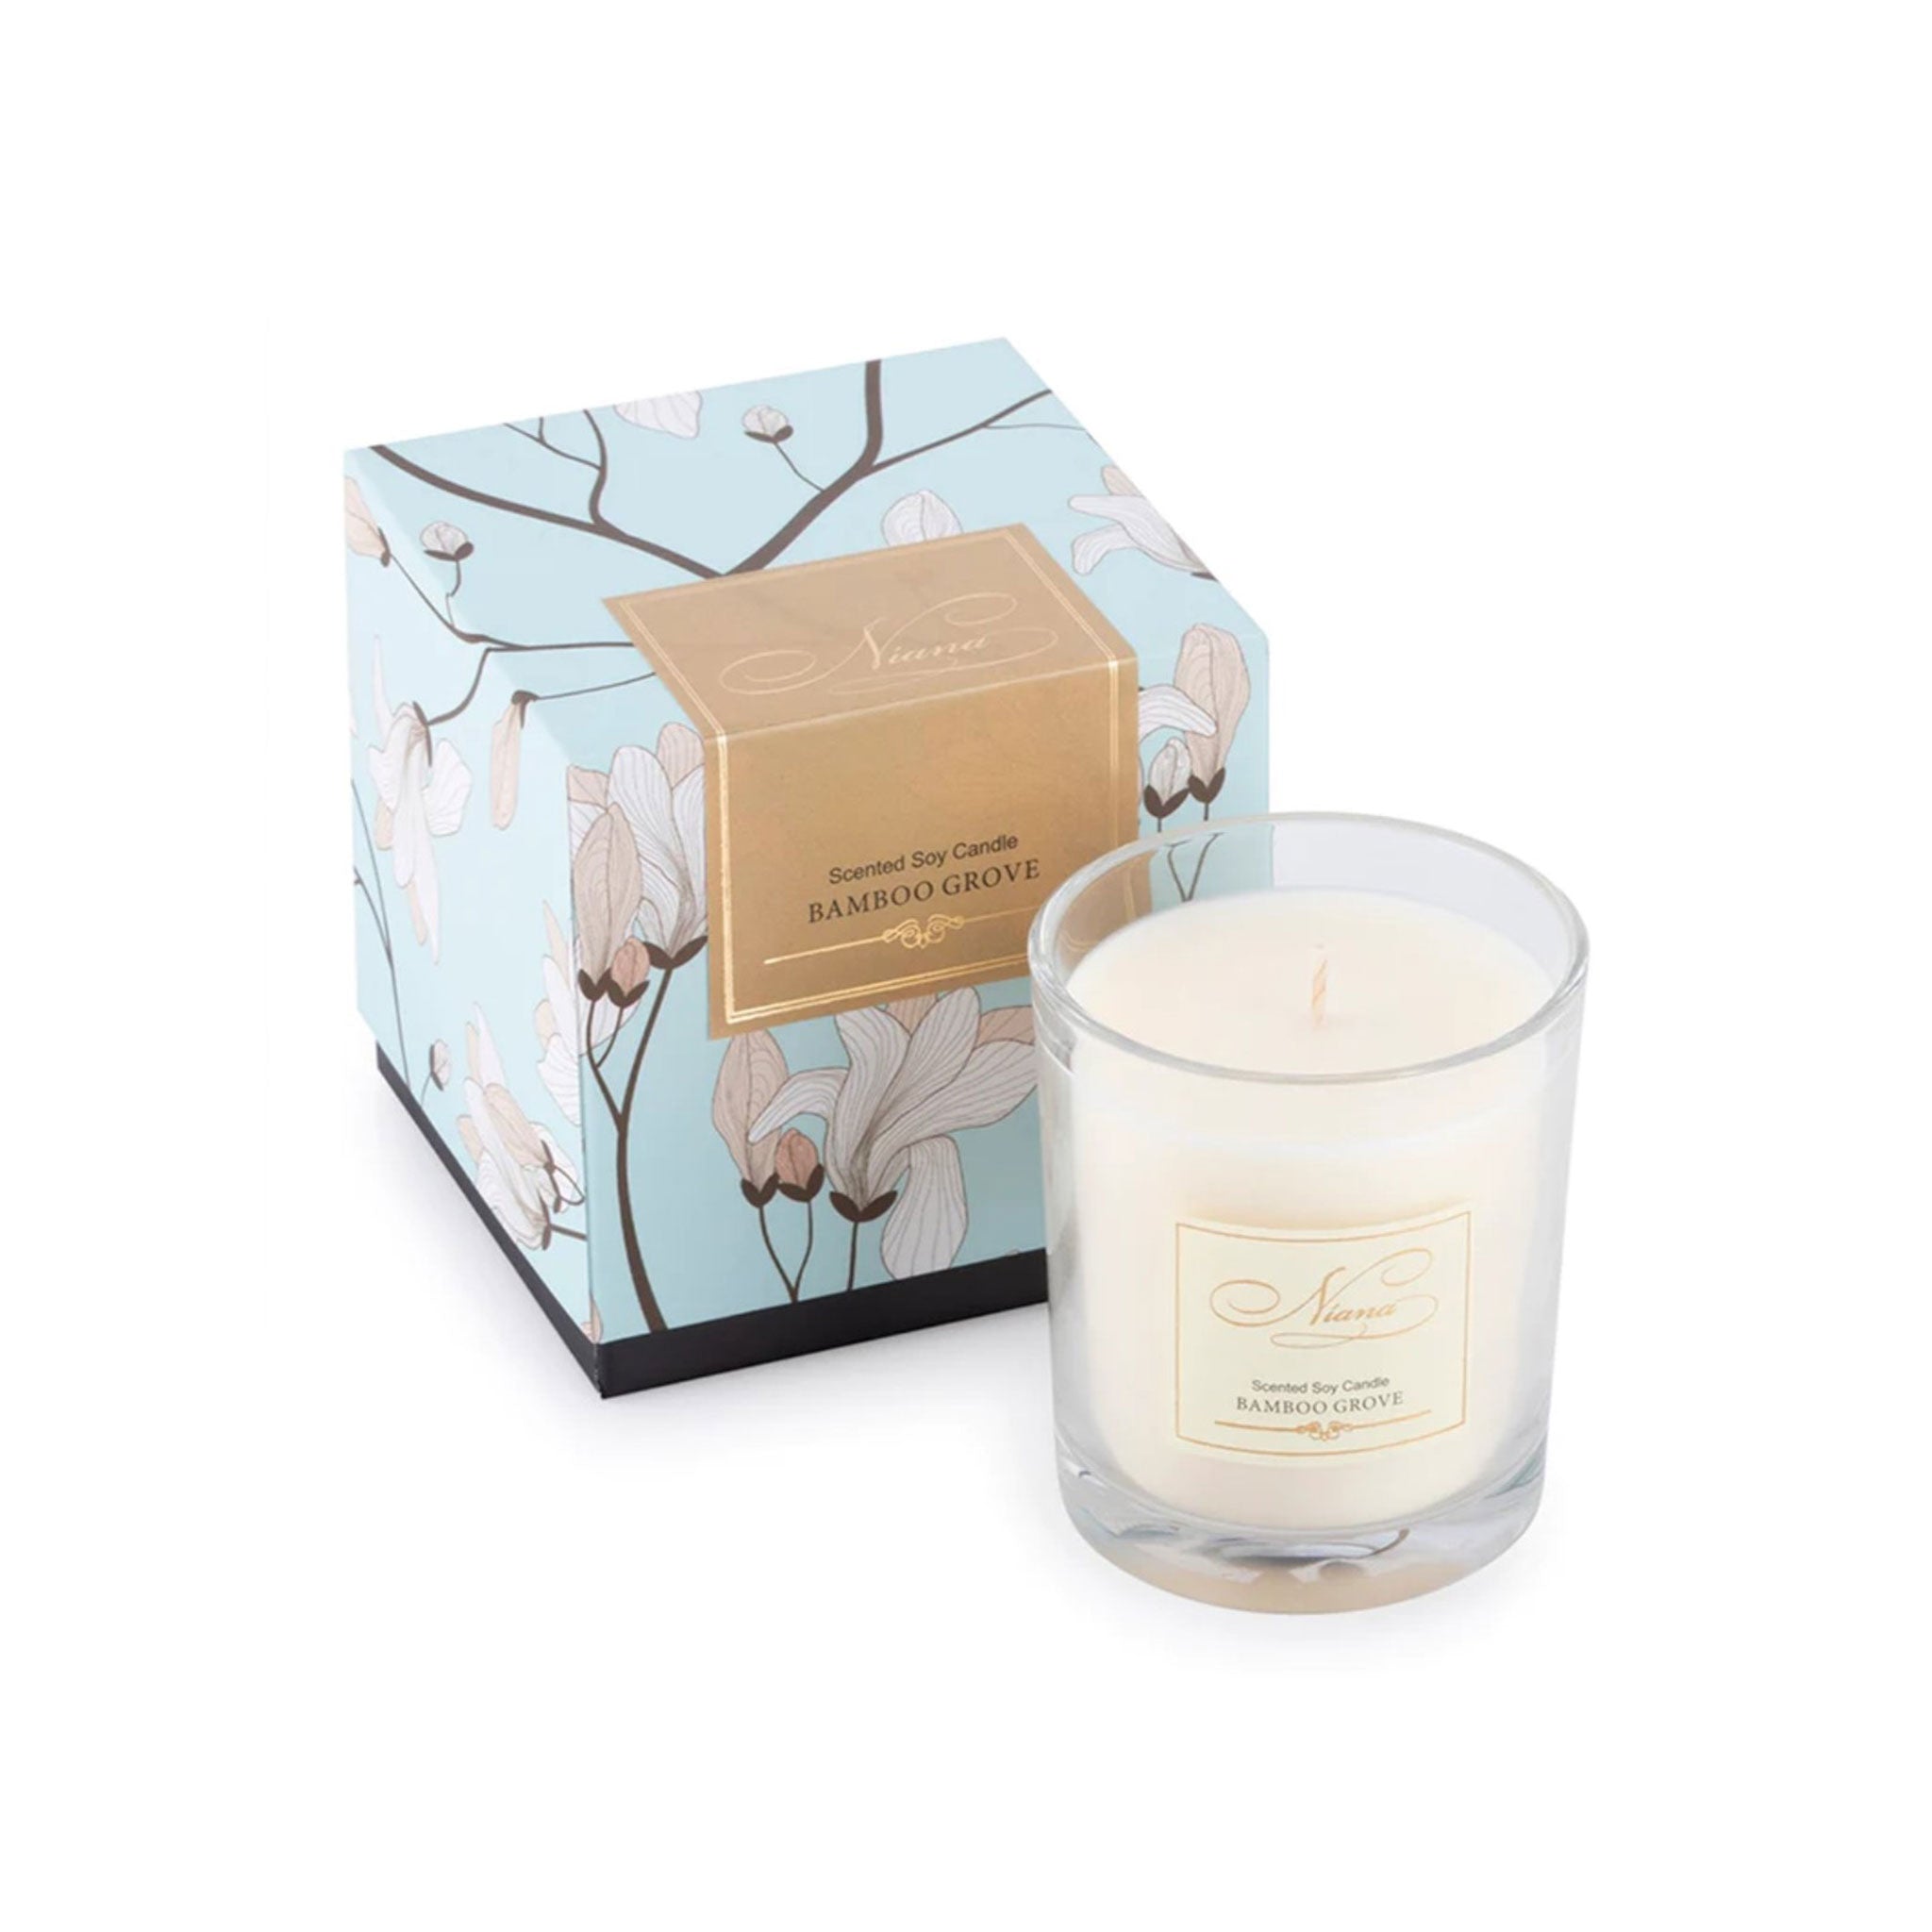  Bamboo Grove Candle - the style salad